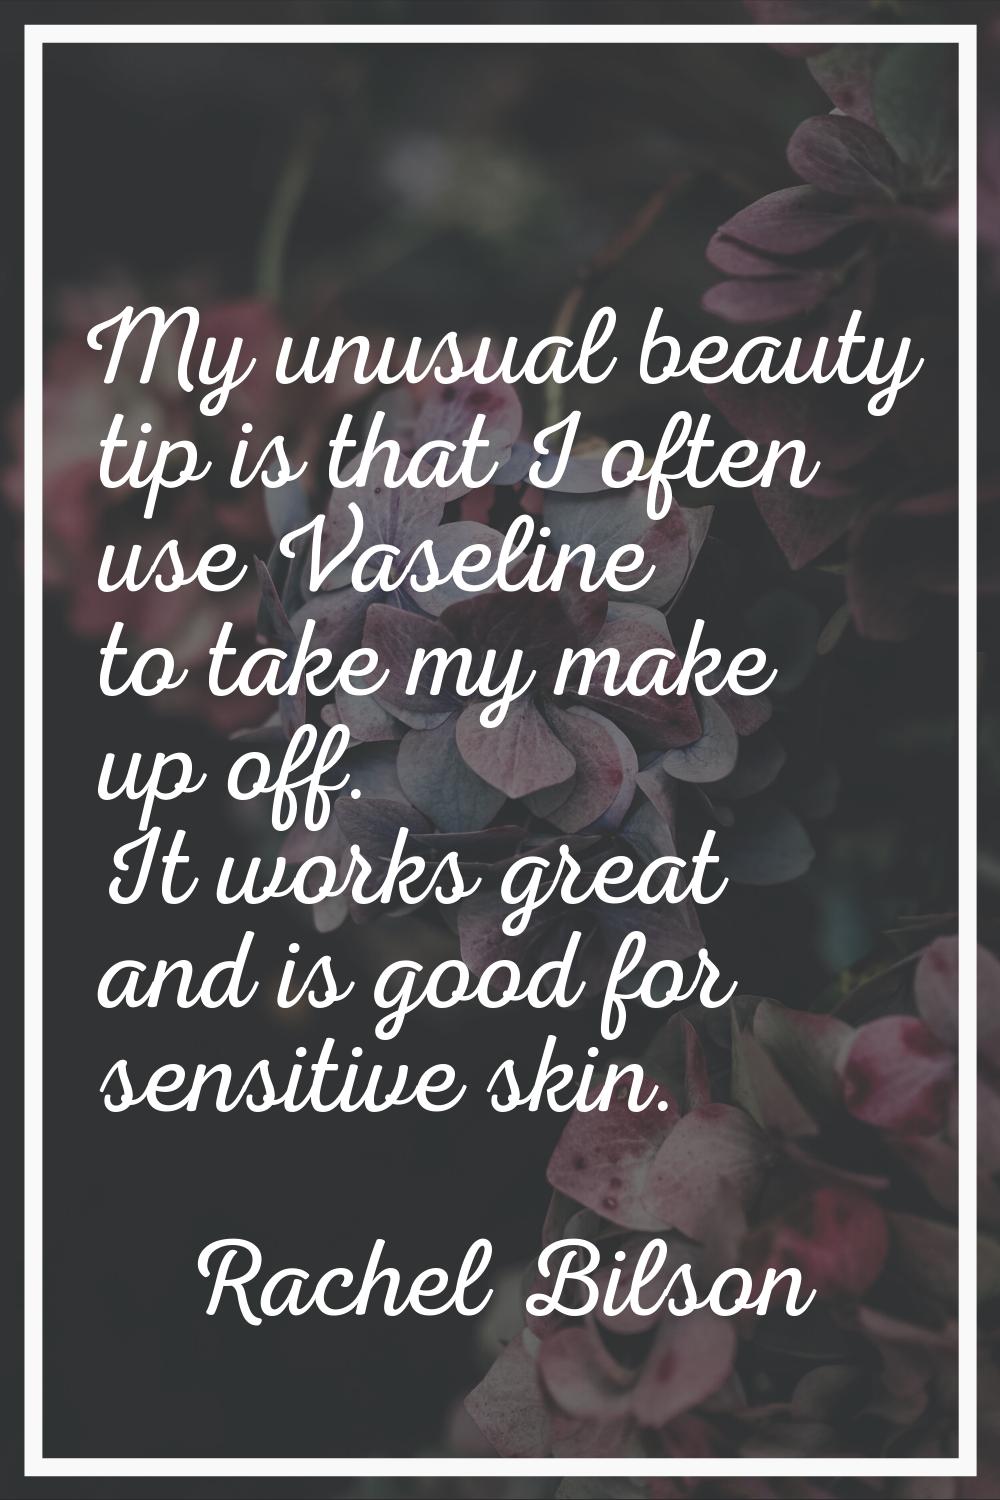 My unusual beauty tip is that I often use Vaseline to take my make up off. It works great and is go